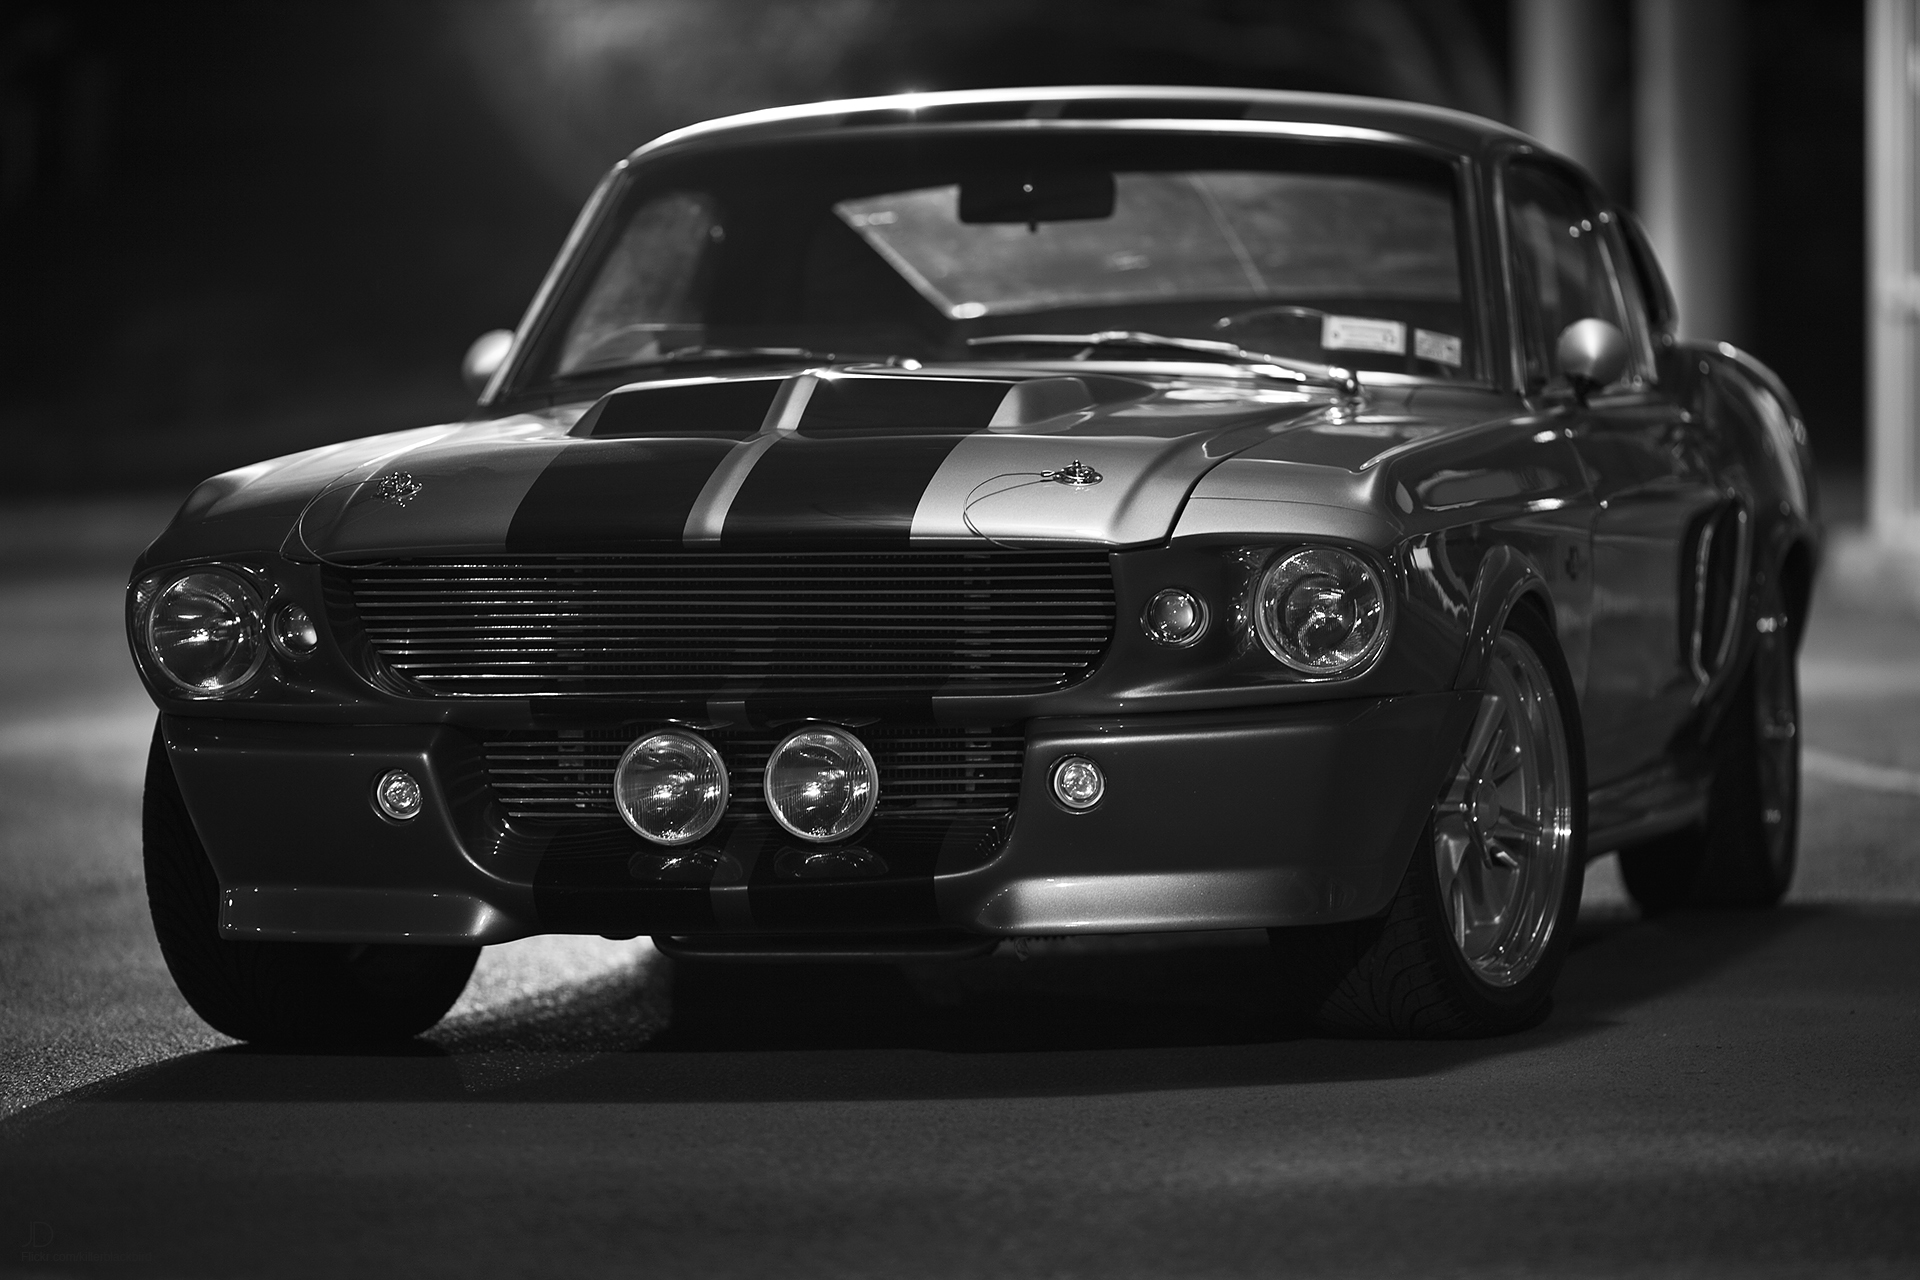 Ford Mustang Gt500 Shelby Eleanor Muscle Car Wallpaper